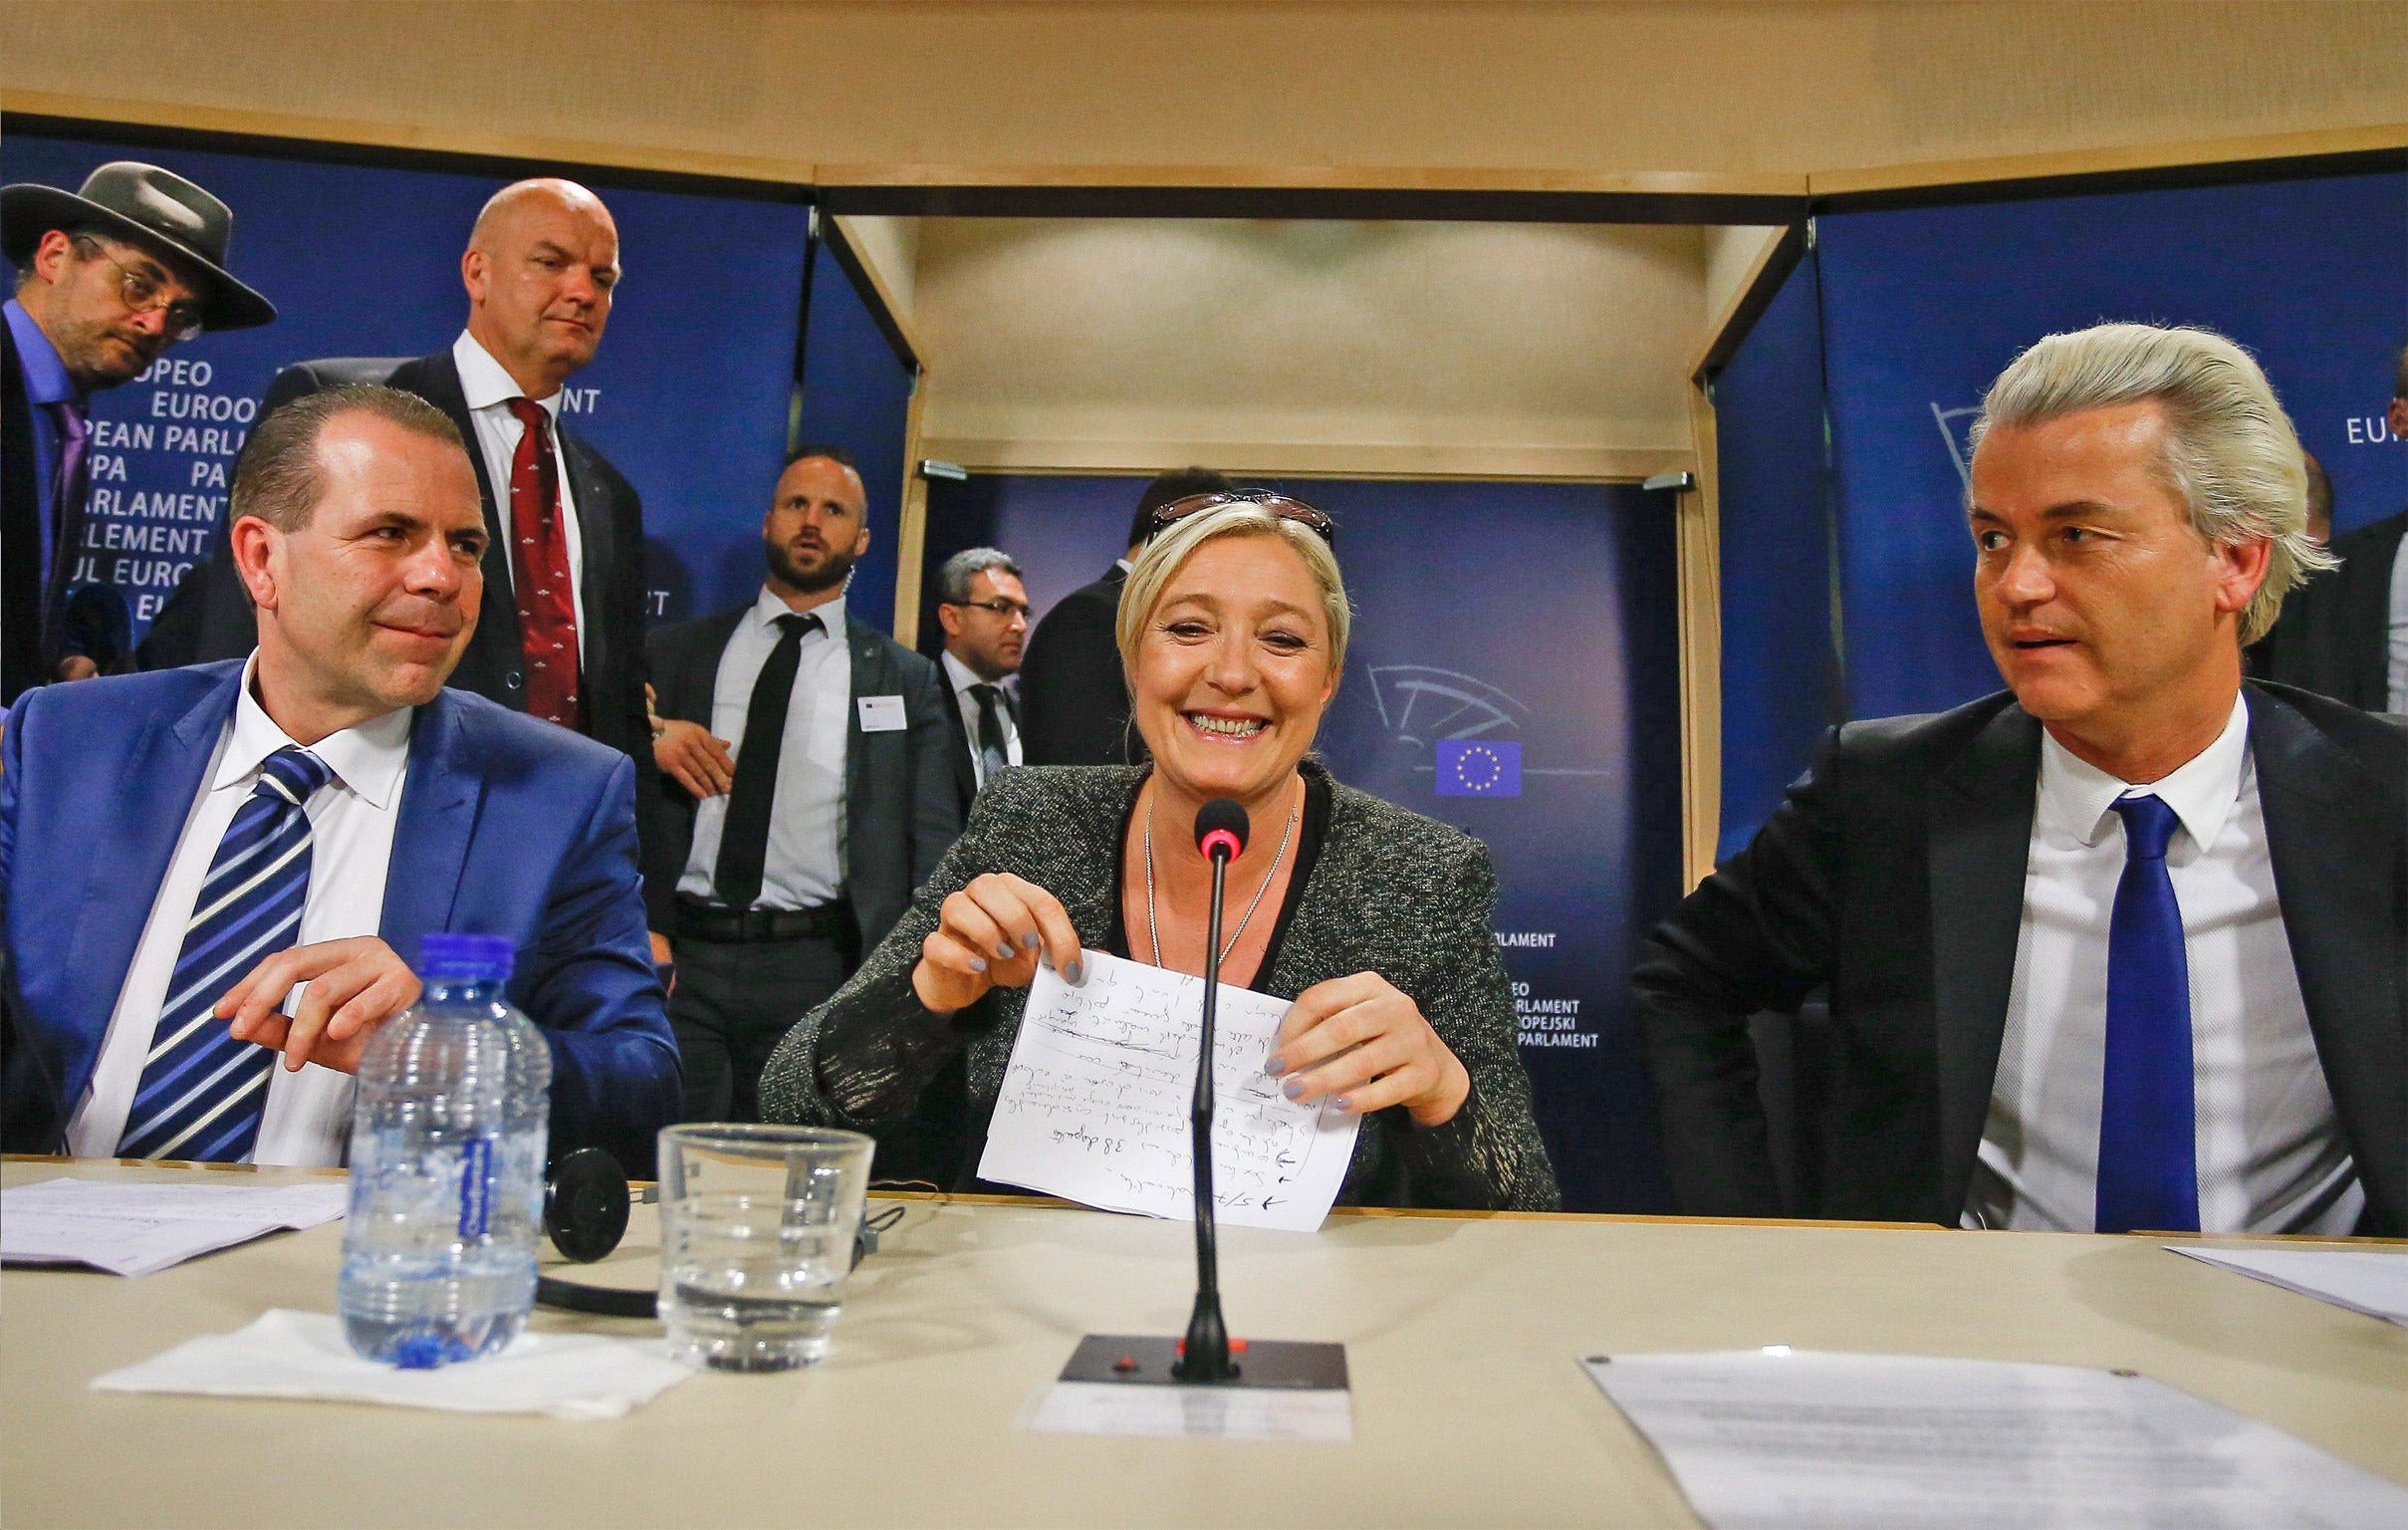 Front National leader Marine Le Pen in Brussels with Harald Vilimsky, from the Austrian Freedom Party (left) and Geert Wilders from the Dutch PVV party